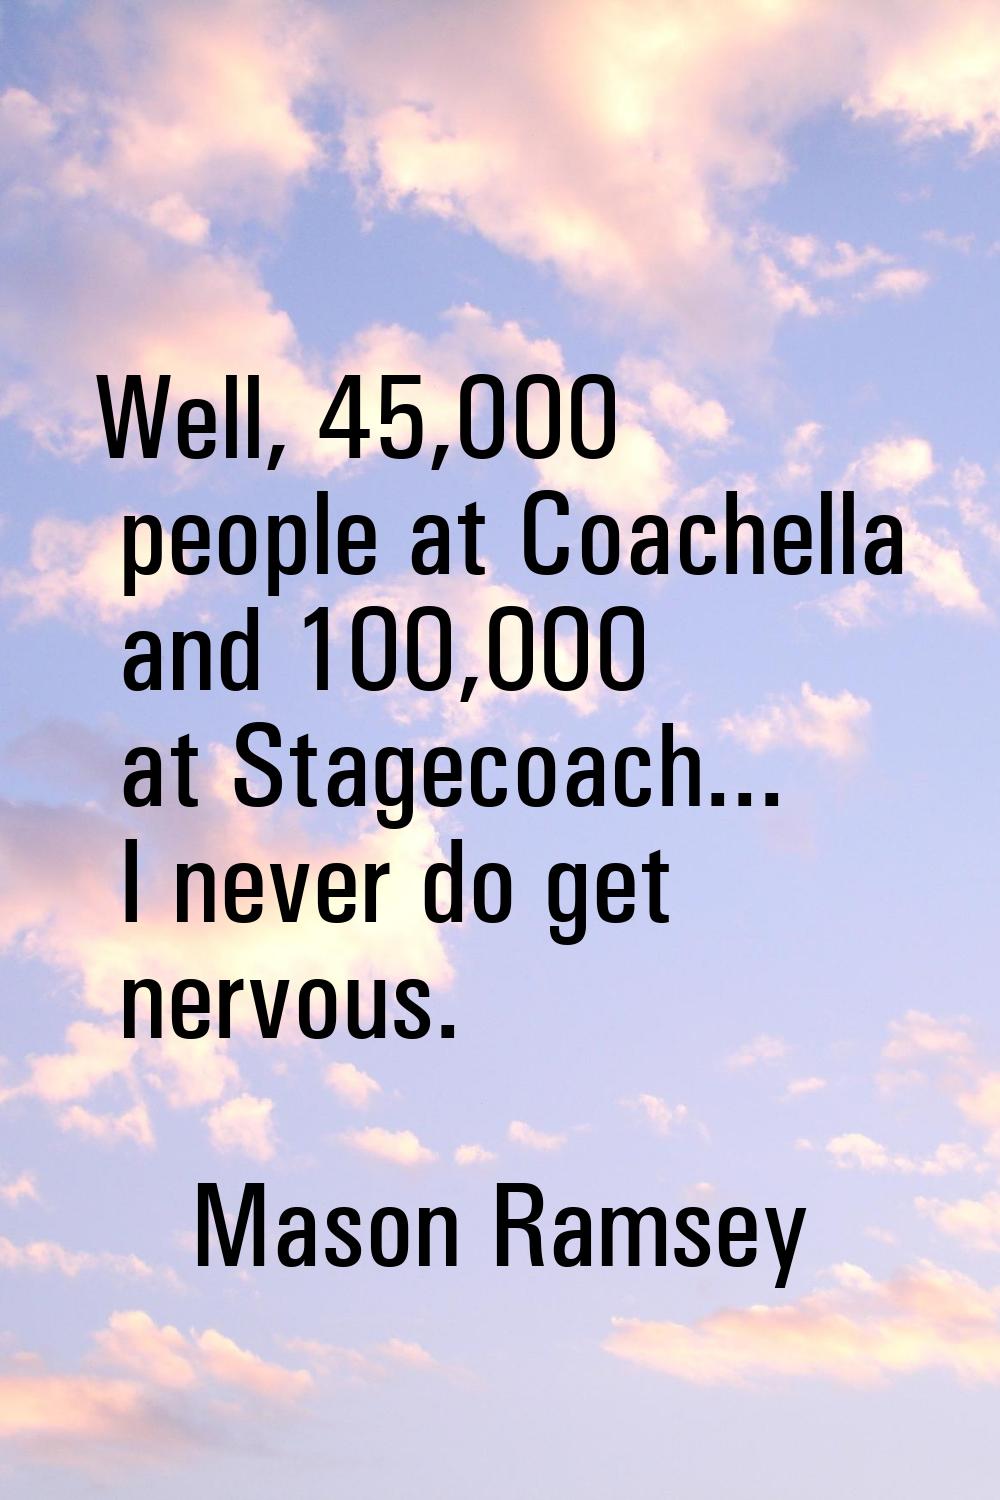 Well, 45,000 people at Coachella and 100,000 at Stagecoach... I never do get nervous.